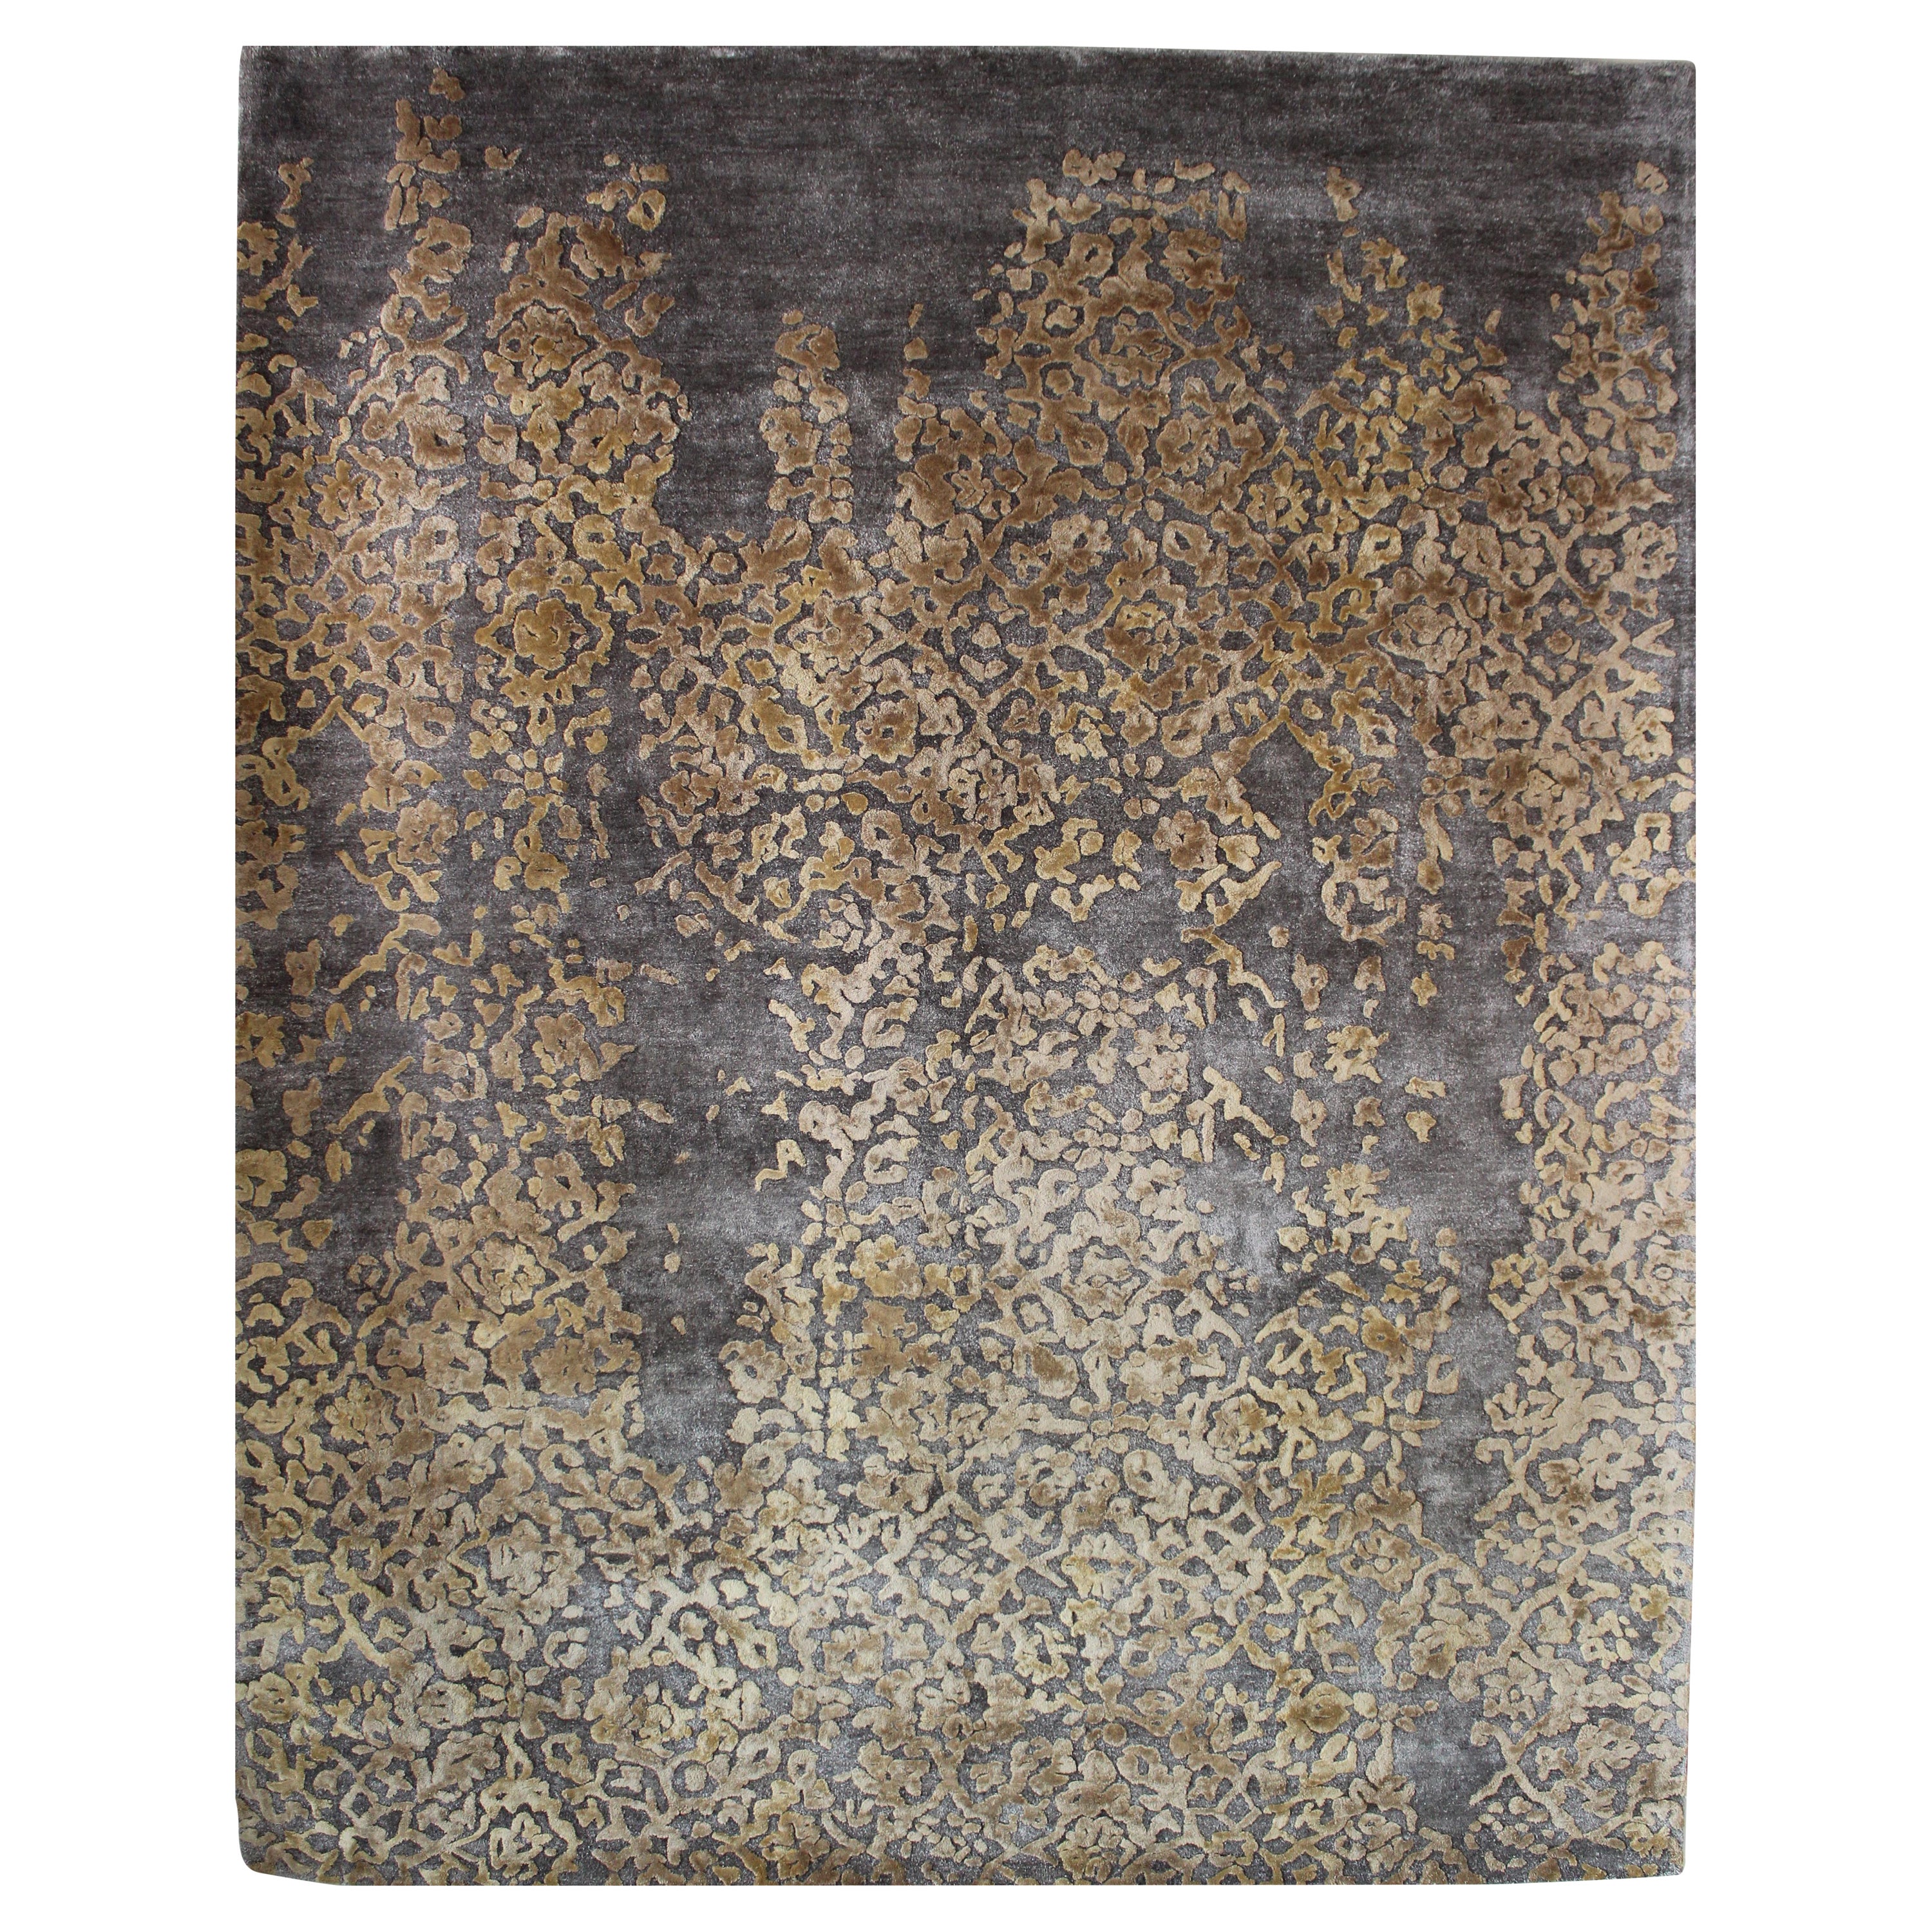 LUCERNE Hand Tufted Contemporary Silk Rug - Gold, Mauve & Beige Colours by Hands For Sale